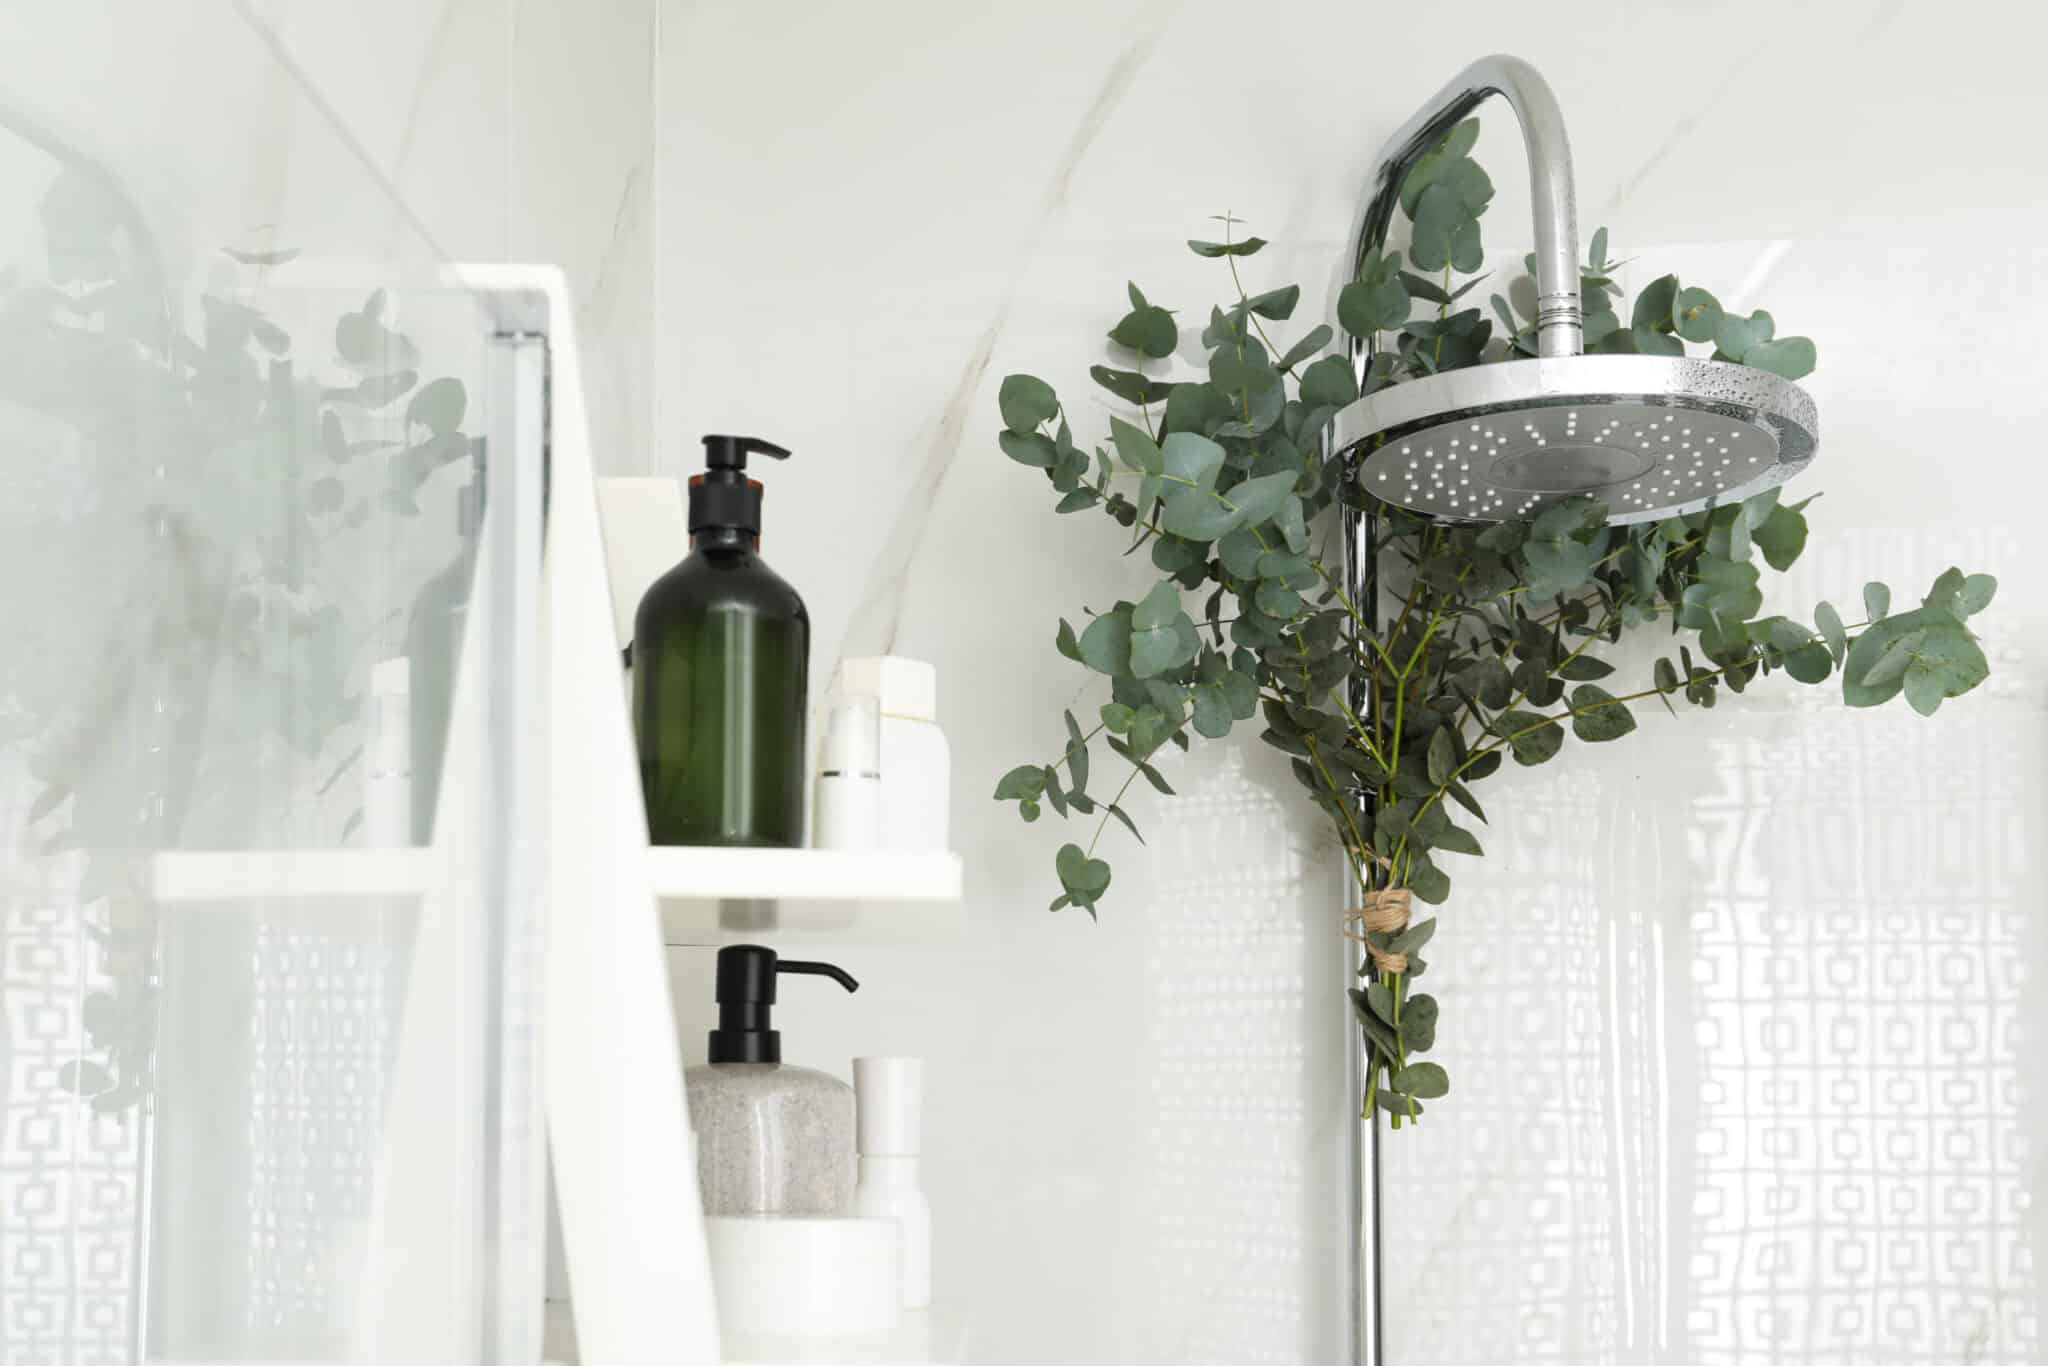 Eucalyptus leaves in the shower to aromatherapy